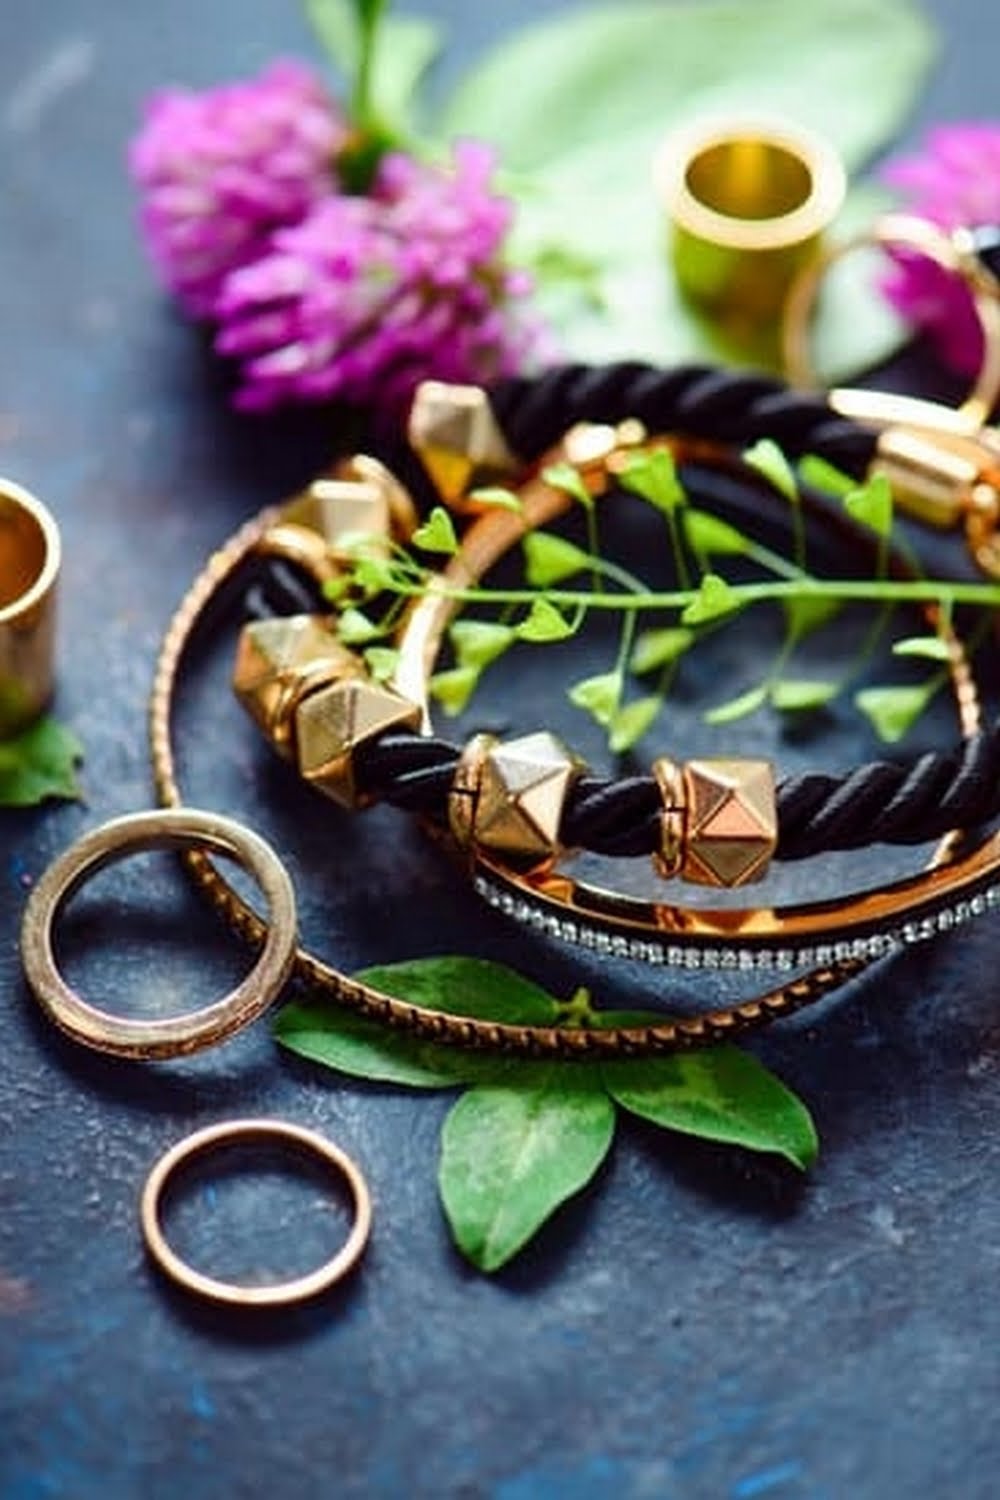 Buying Jewelry? Here is a DIY Tutorial For You